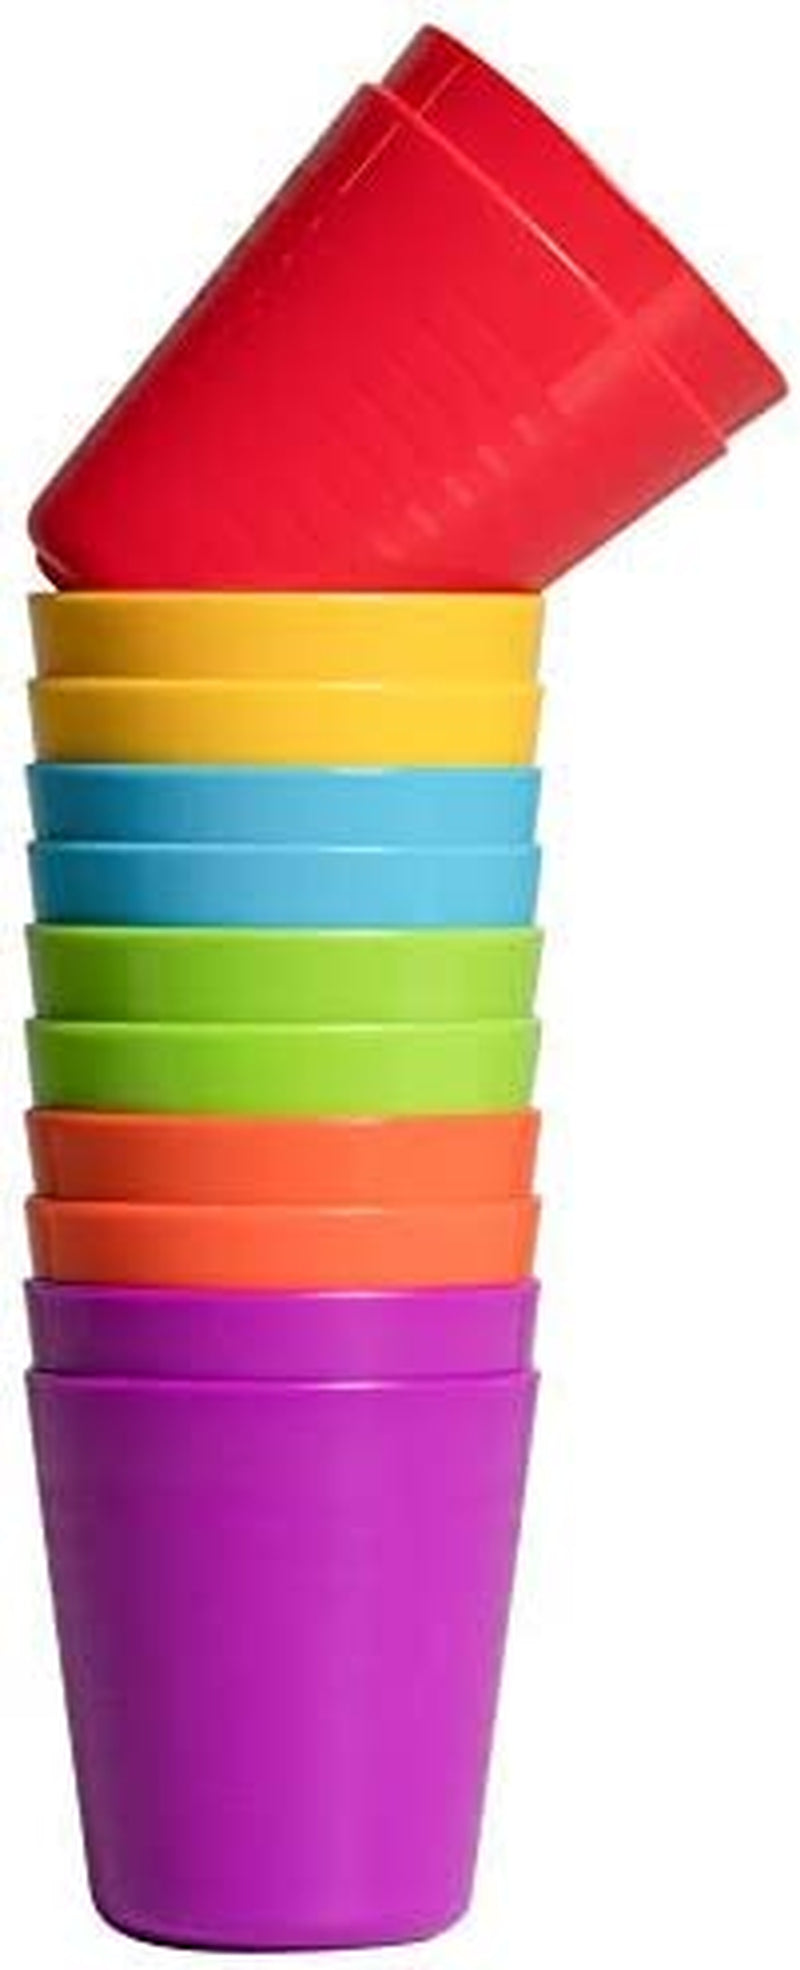 Klickpick Home - Set of 12 Kids Plastic Cups - 8 Oz Children Drinking Cups Tumblers Reusable - Dishwasher Safe - Bpa-Free Cups for Kids & Toddlers Bright Colored - Unbreakable Toddler Cups Home & Garden > Kitchen & Dining > Tableware > Drinkware Klickpick Home   